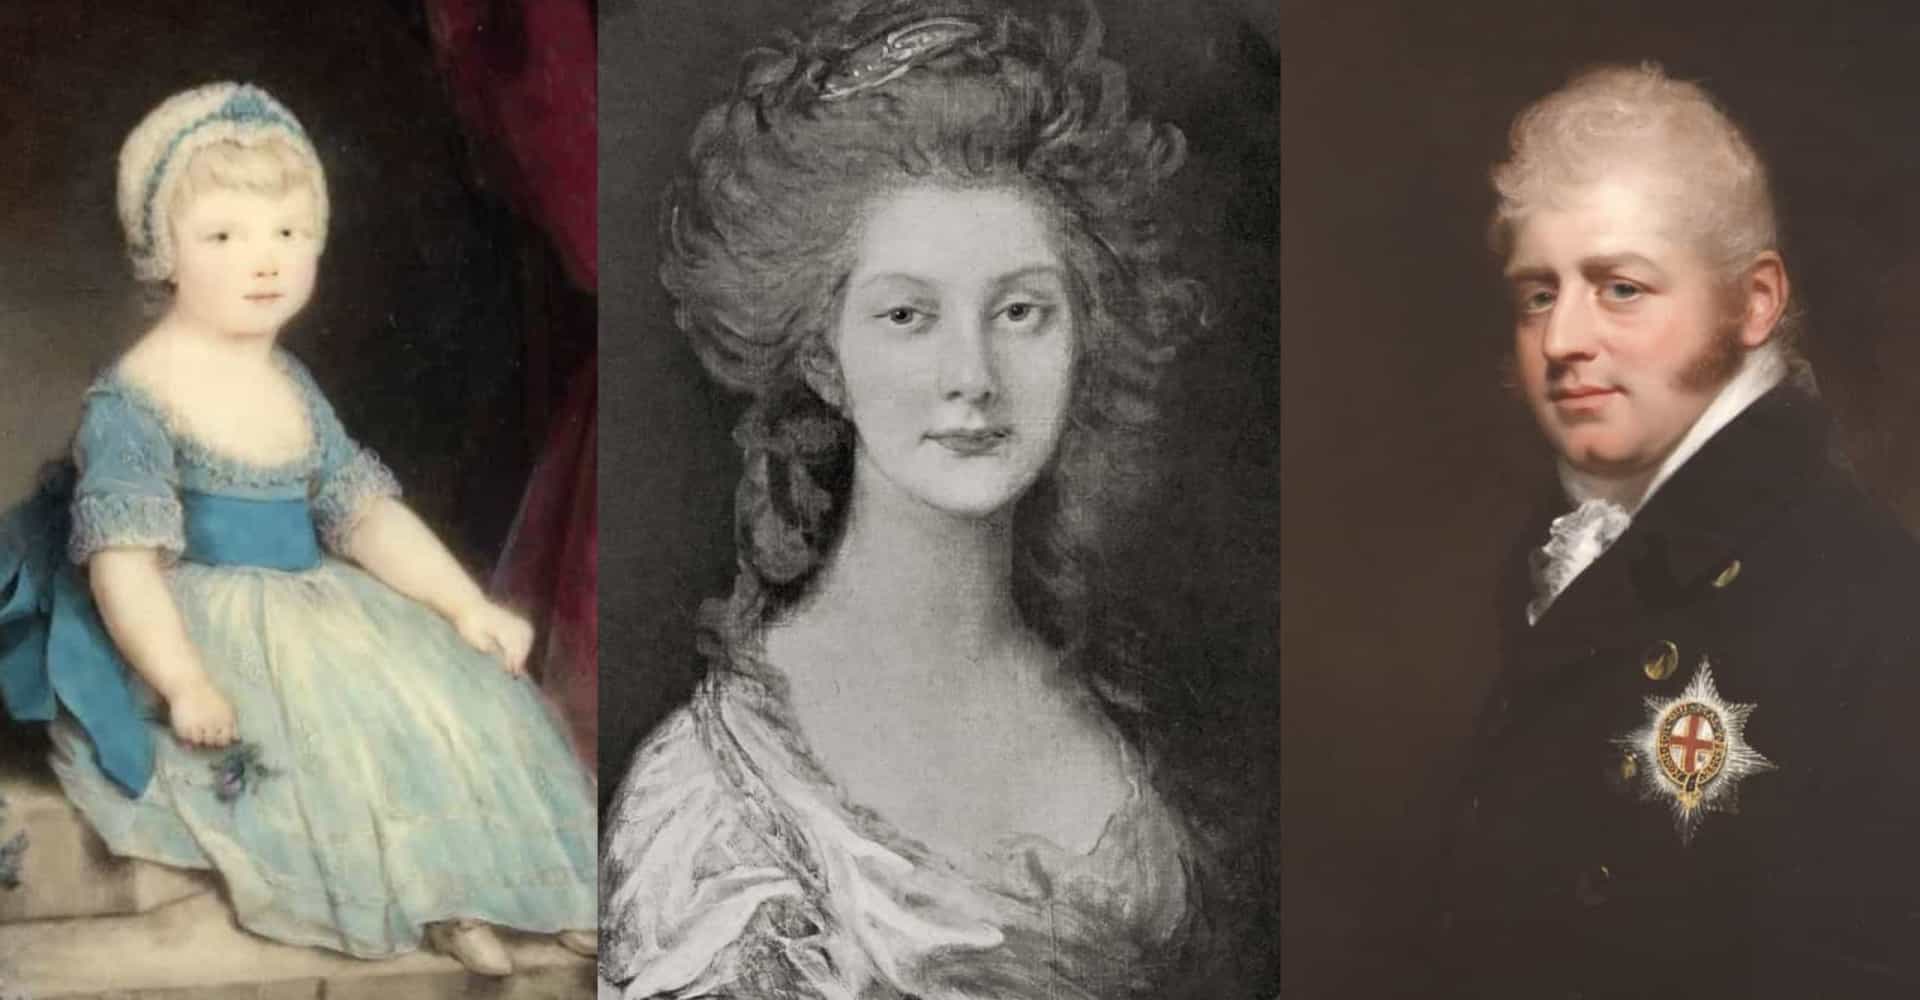 <p>Sure, families were a lot bigger back then, but King George III and Queen Charlotte really went for it and had 15 children! These men and women ended up shaping the British monarchy, and a few tried to steer the <a href="https://www.starsinsider.com/lifestyle/450359/the-royal-weddings-that-changed-european-history" rel="noopener">British royal family</a> in different directions. Some even became kings themselves.</p><p>From the moment George III's first child was born, in 1762, to when the last one died, in 1857, in this gallery you'll learn all about who his 15 children were, and their contributions to history. Click on for more.</p><p>You may also like: <a href="https://www.starsinsider.com/n/145704?utm_source=msn.com&utm_medium=display&utm_campaign=referral_description&utm_content=498721v1en-au">Creepy! Celebrities who have doppelgangers from the past</a></p>